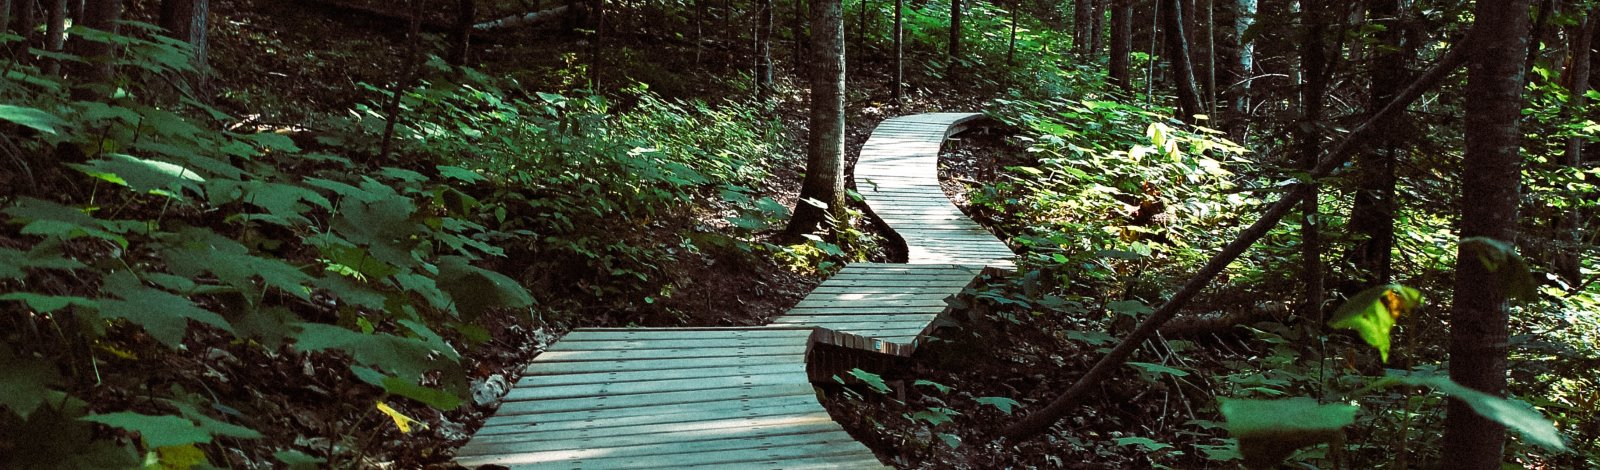 wooden path through wooded area